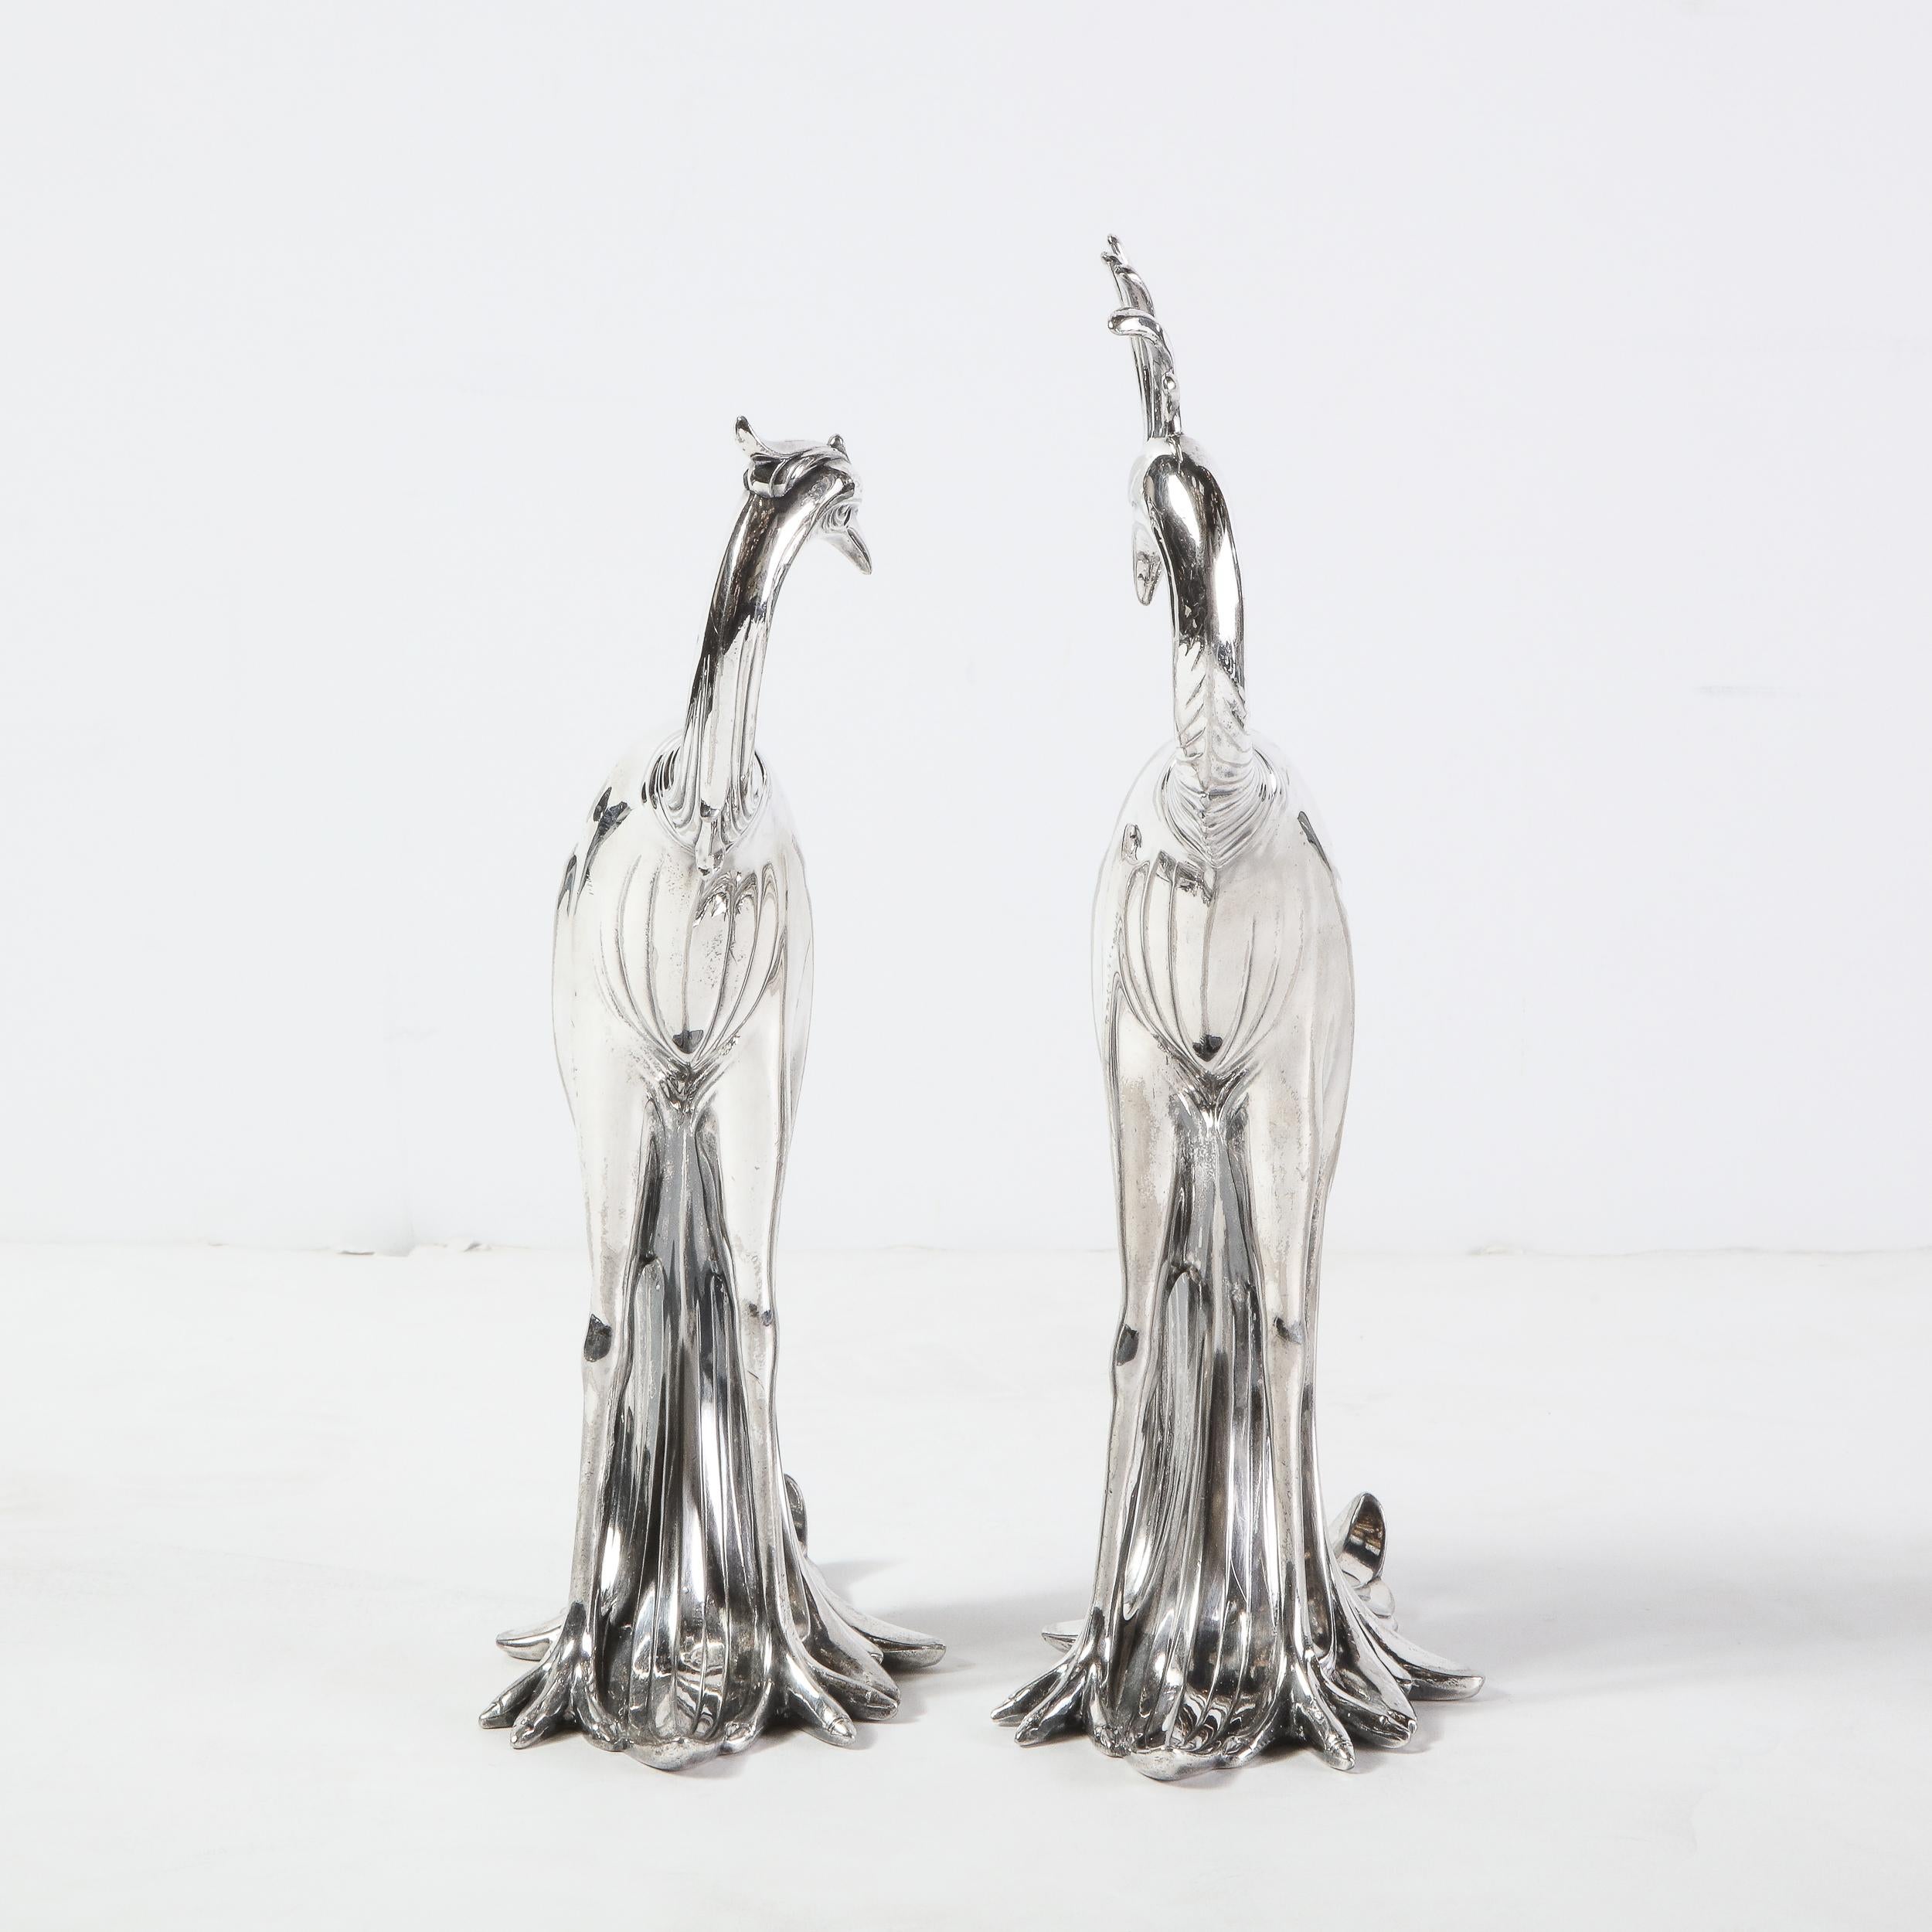 Pair of 1930s Art Deco Silverplated Stylized Peacock Sculptures by Weidlich Bros 3